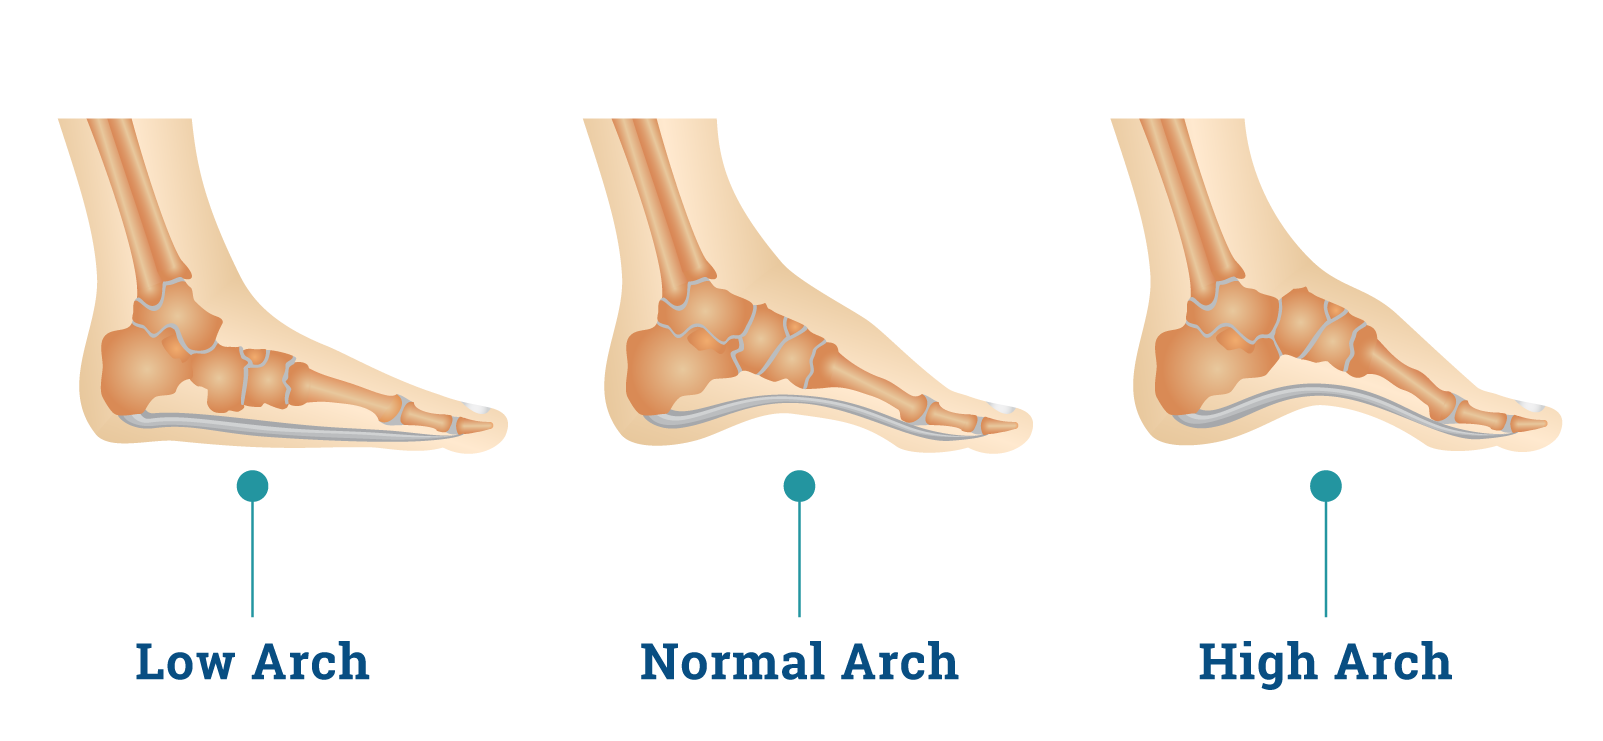 Know Your Arches - ShoeInsoles.co.uk